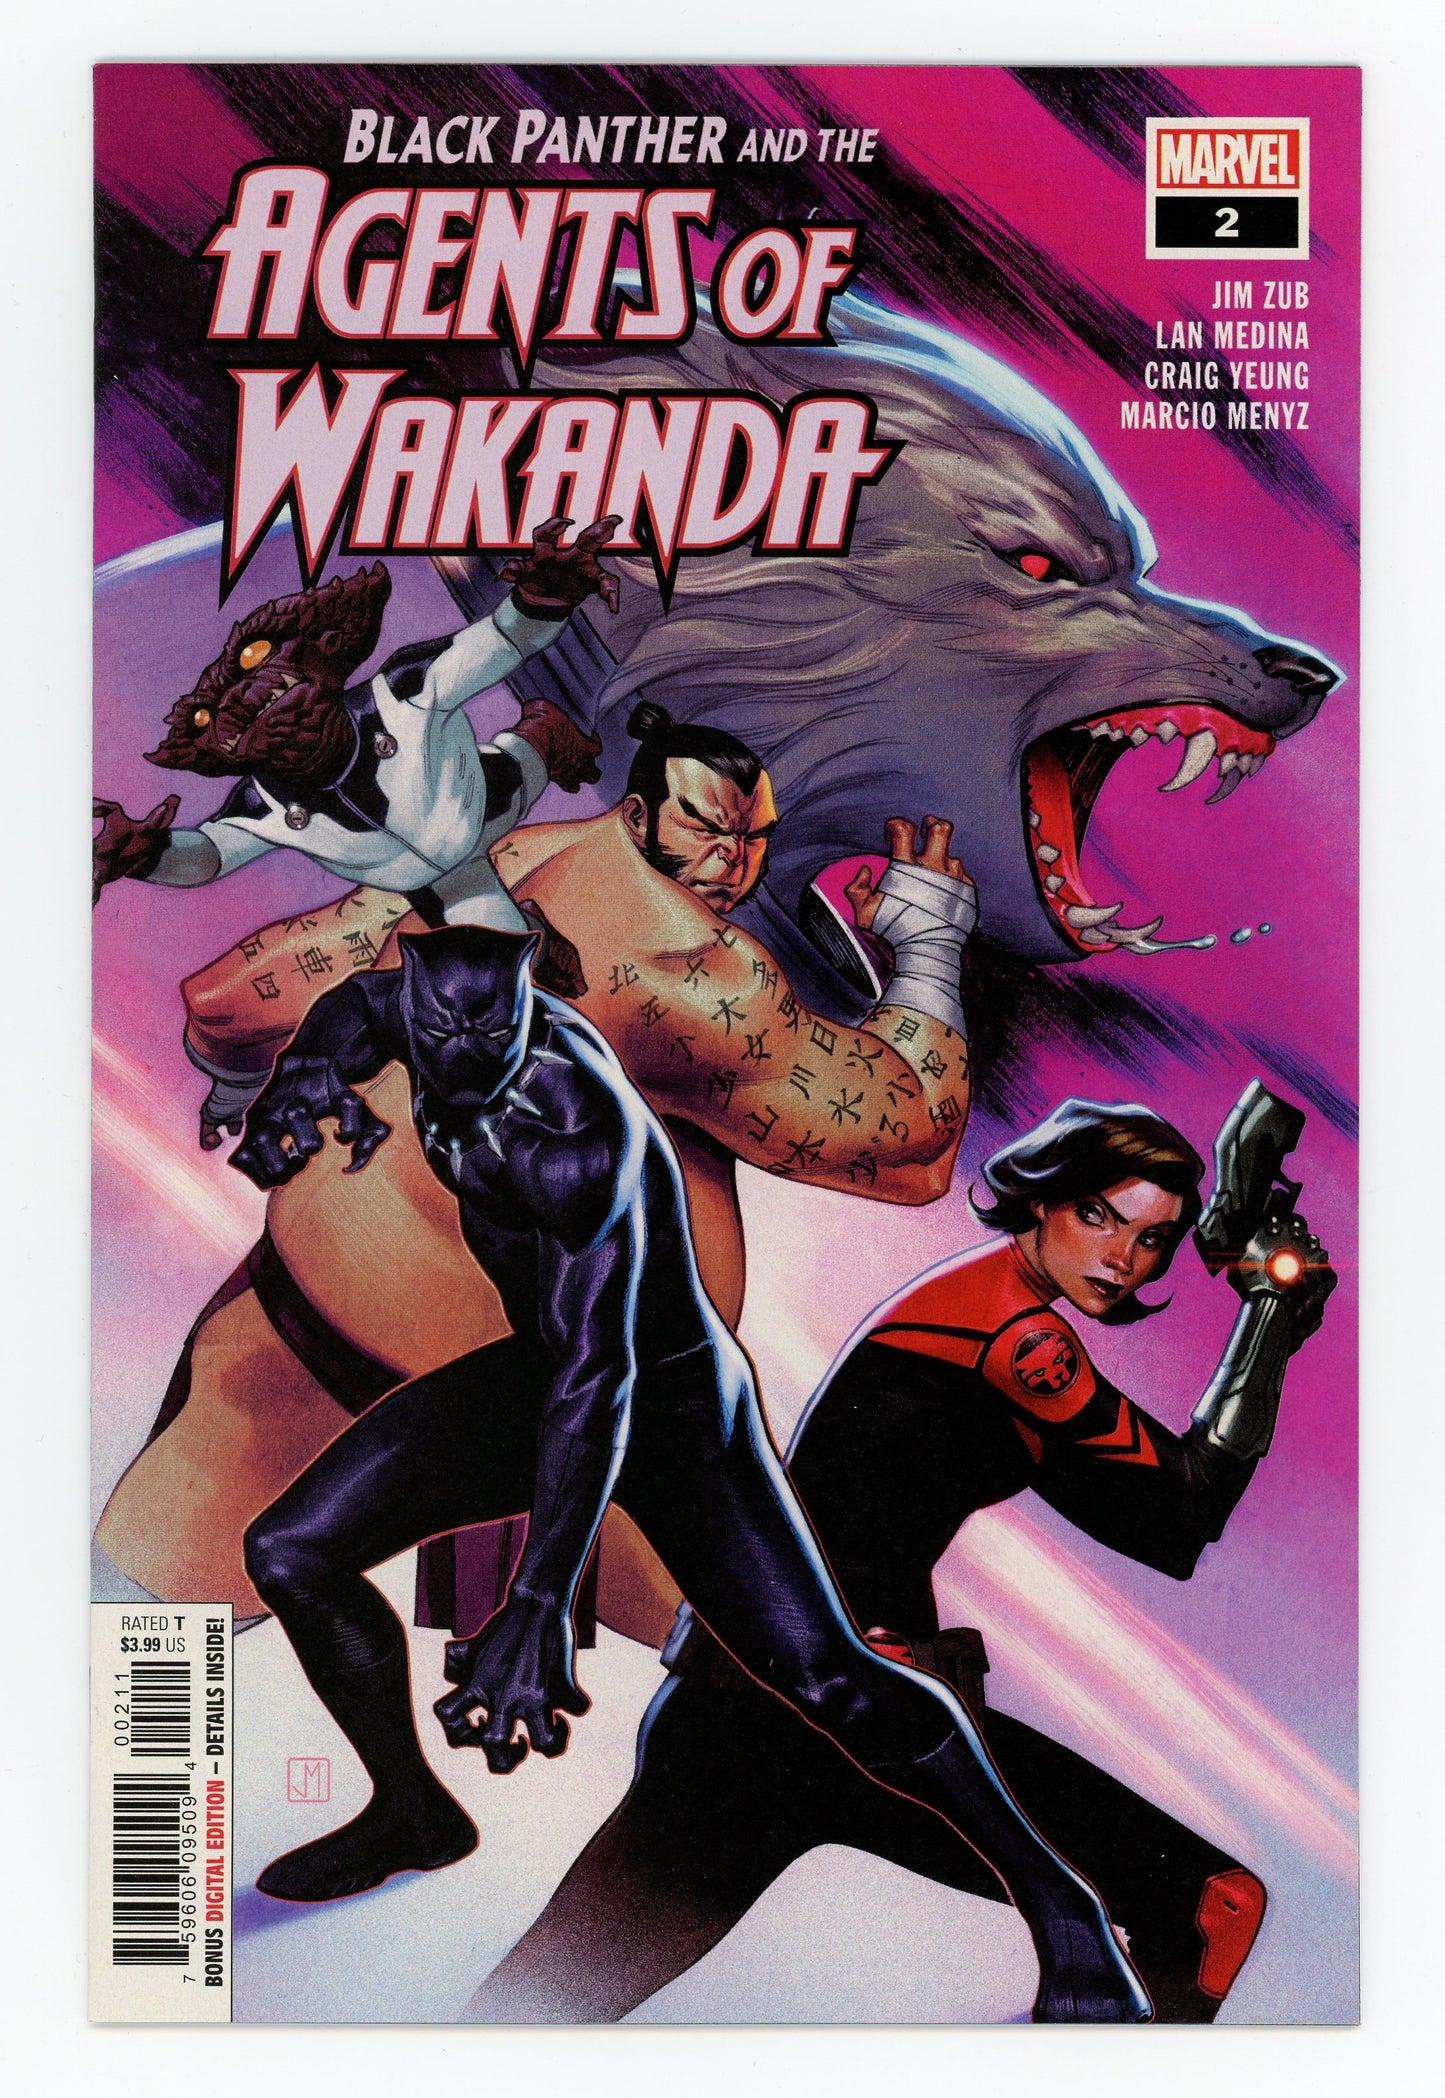 BLACK PANTHER AND THE AGENTS OF WAKANDA #1-7 BUNDLE (2019)